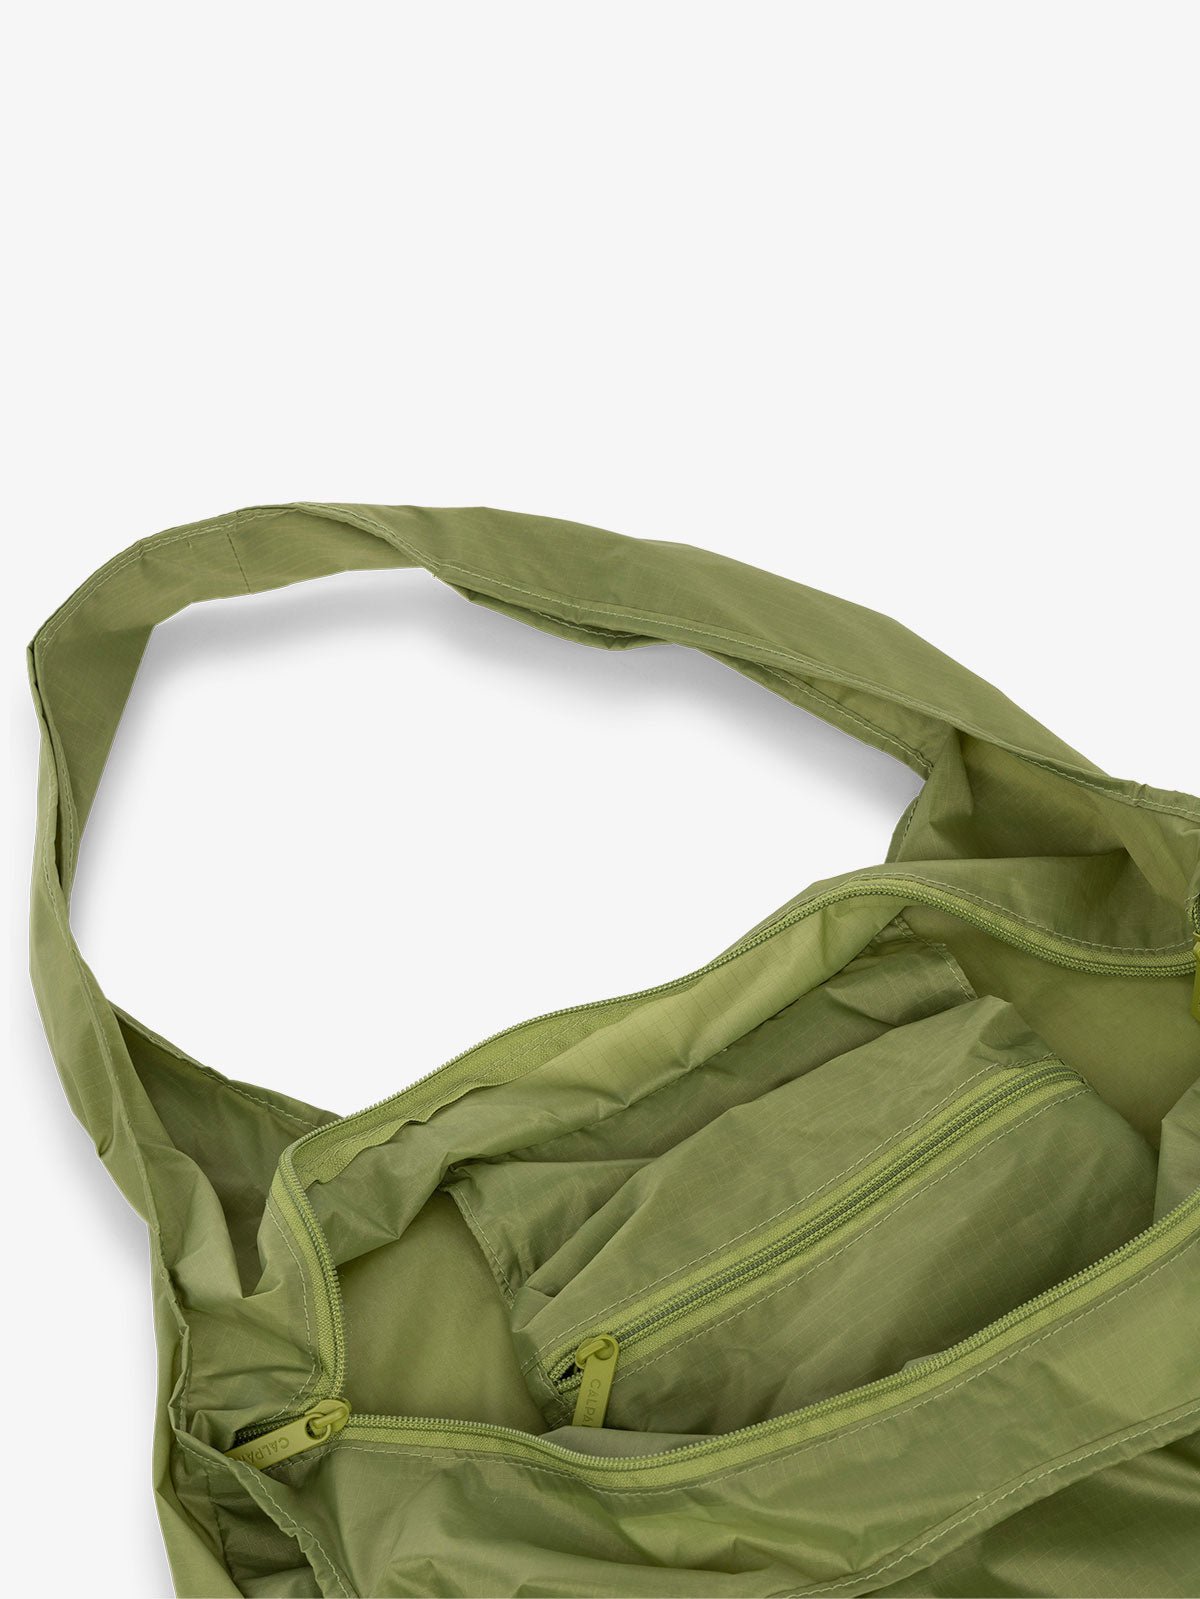 CALPAK Compakt shopping tote bag with interior zipper pocket in palm green